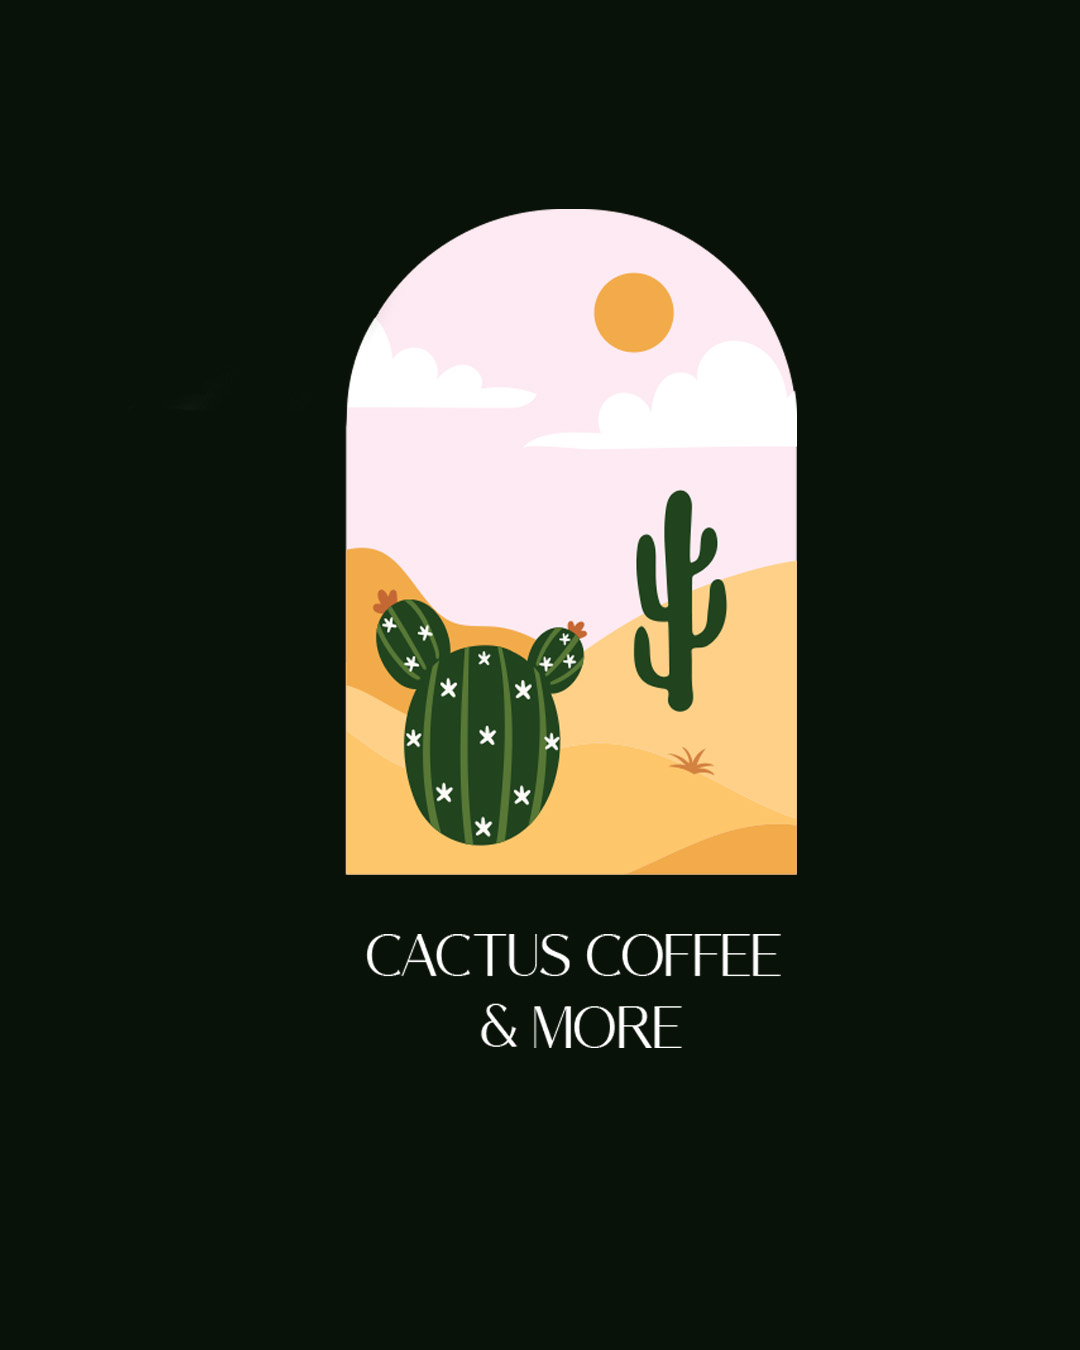 Visual Identity for Cactus Coffee & More